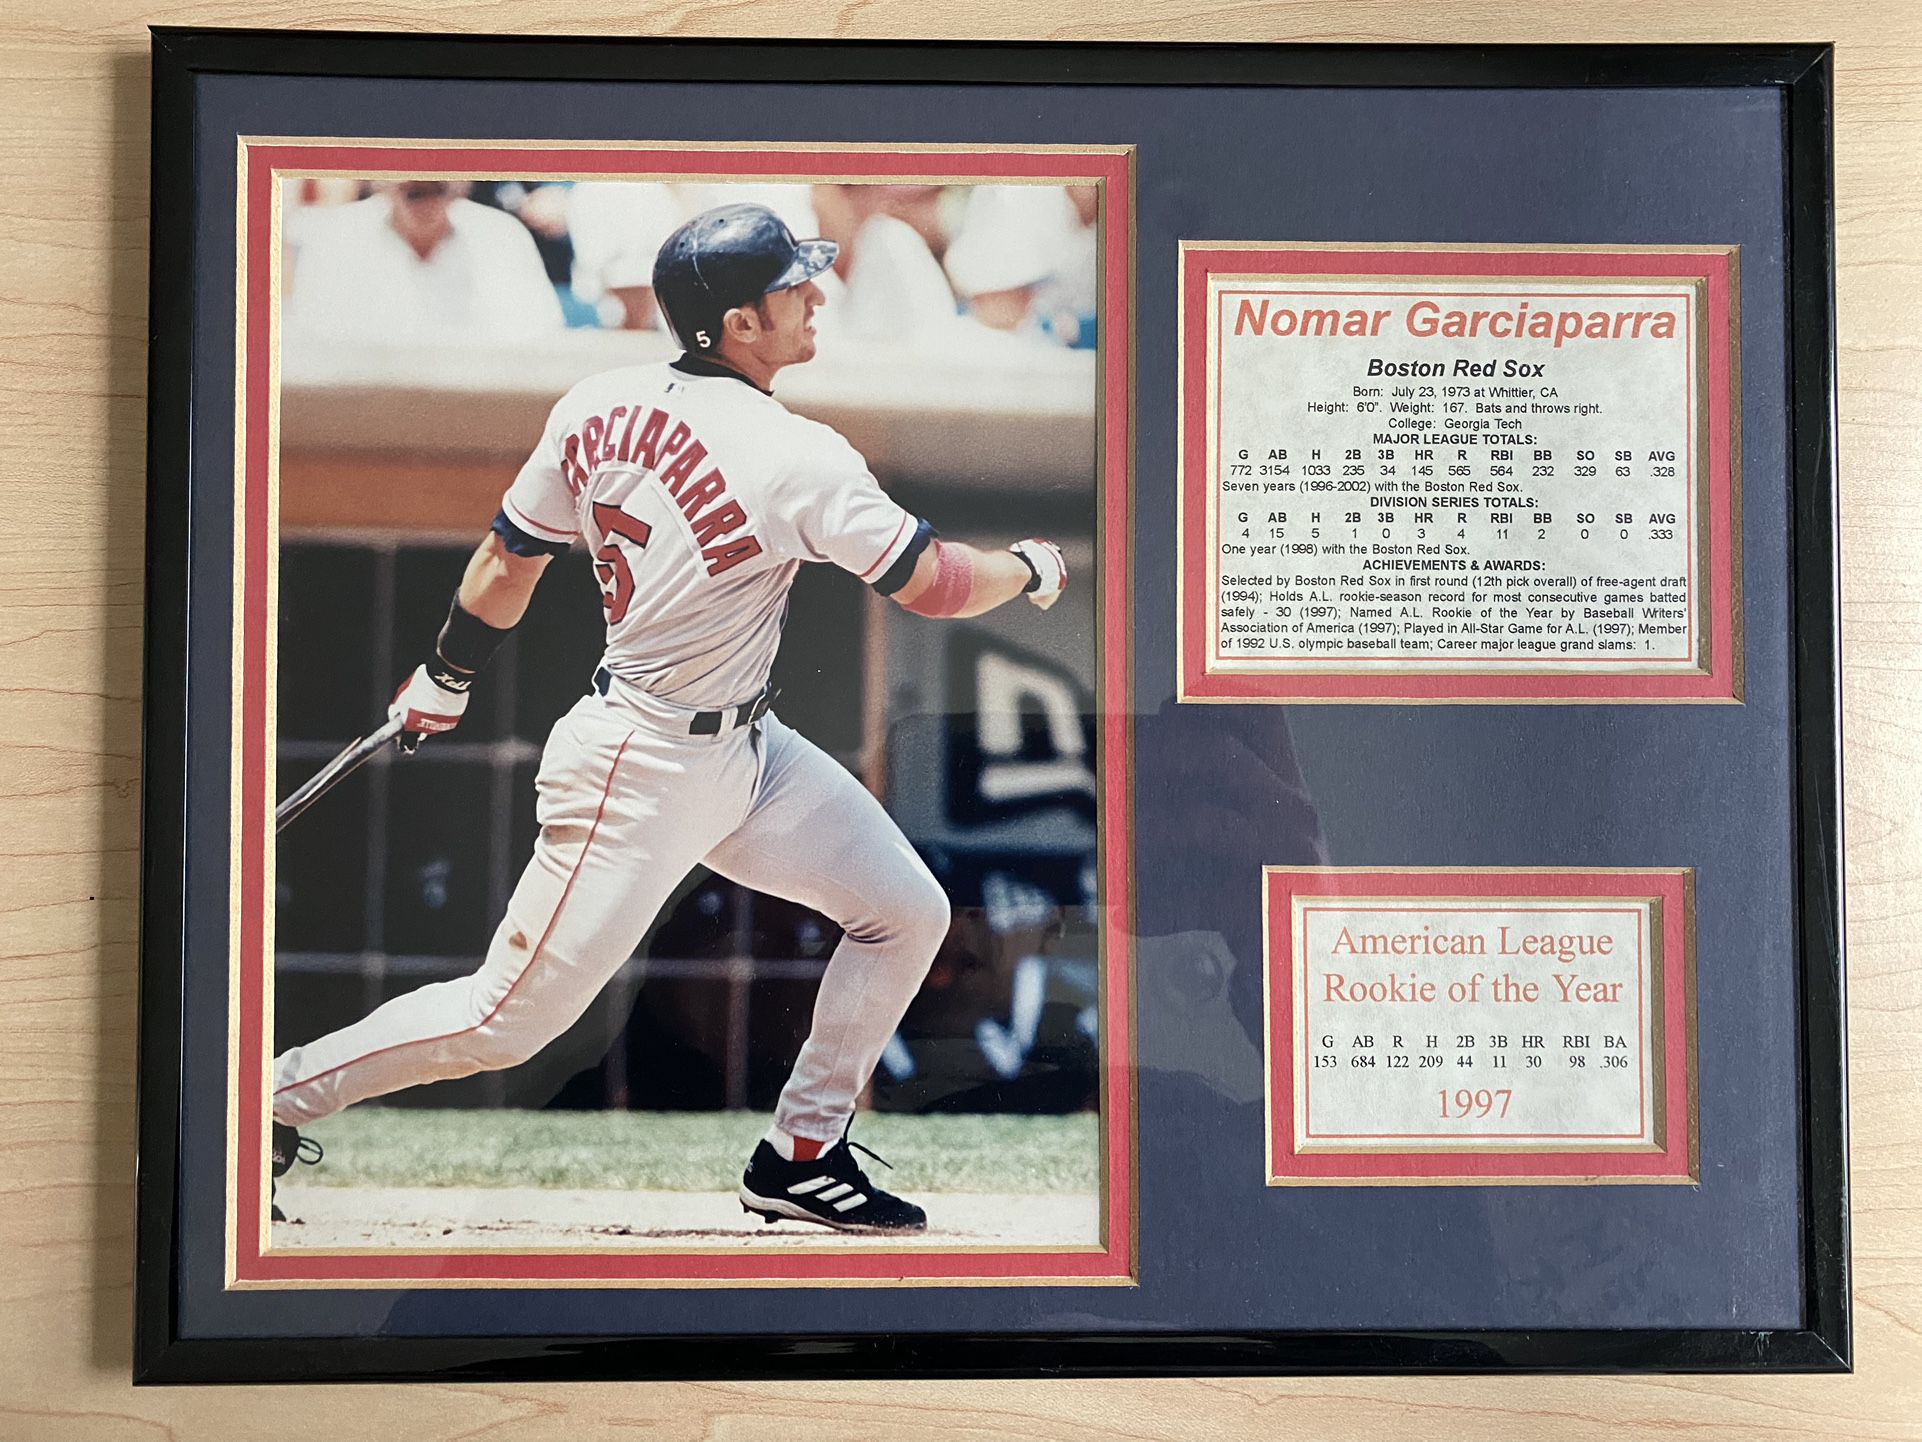 Nomar Garciaparra 1997 Rookie Of The Year Artwork for Sale in